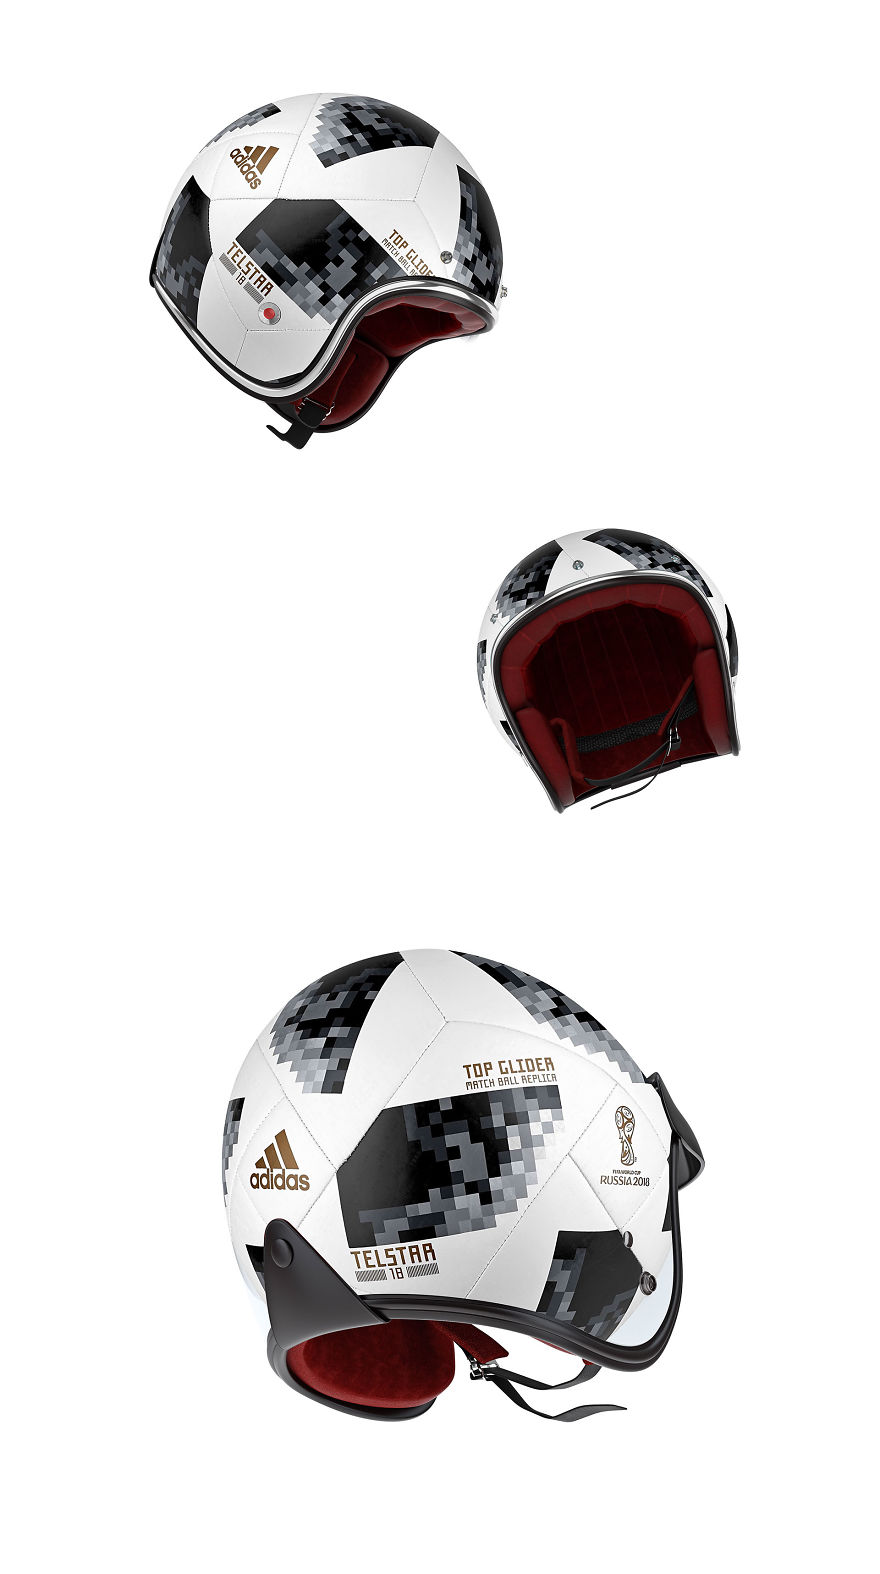 I Made Helmet Design Inspired By Fifa Russia 2018 Official Soccer Ball.